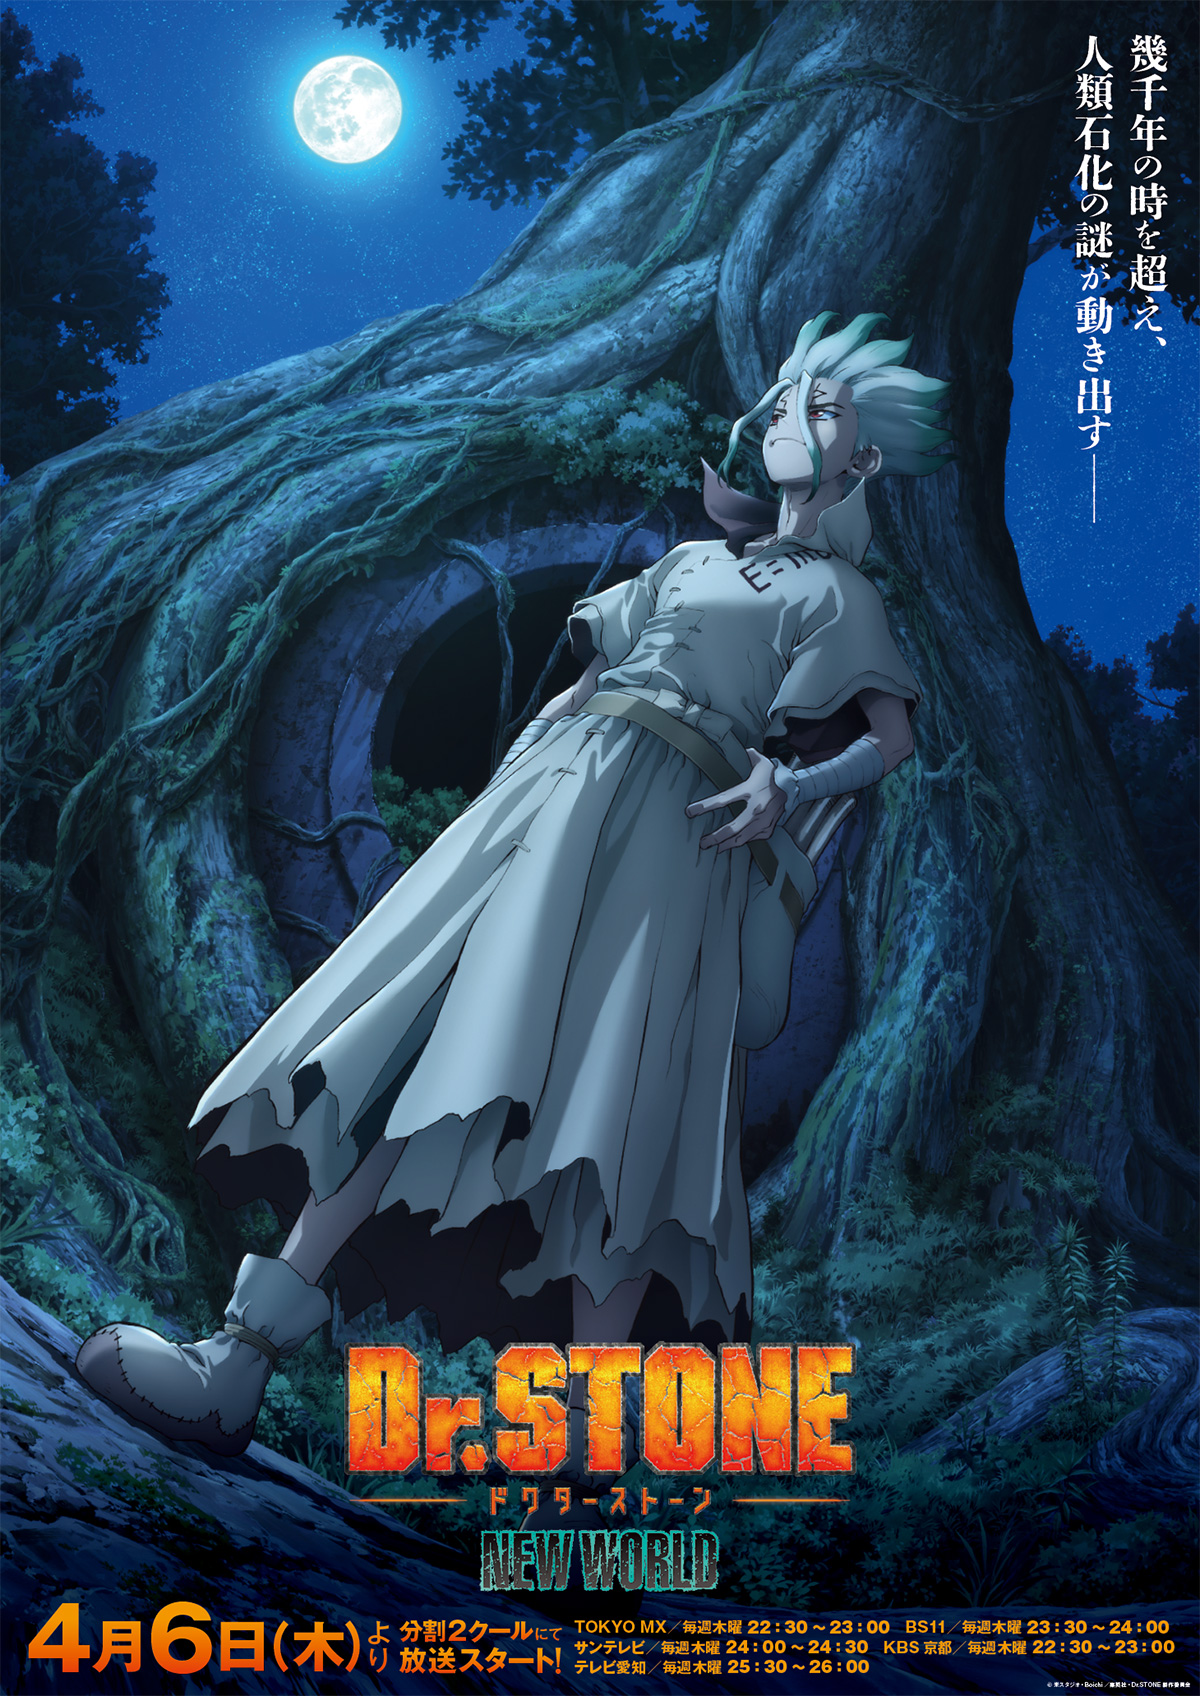 『Dr.STONE NEW WORLD』（第2クール）